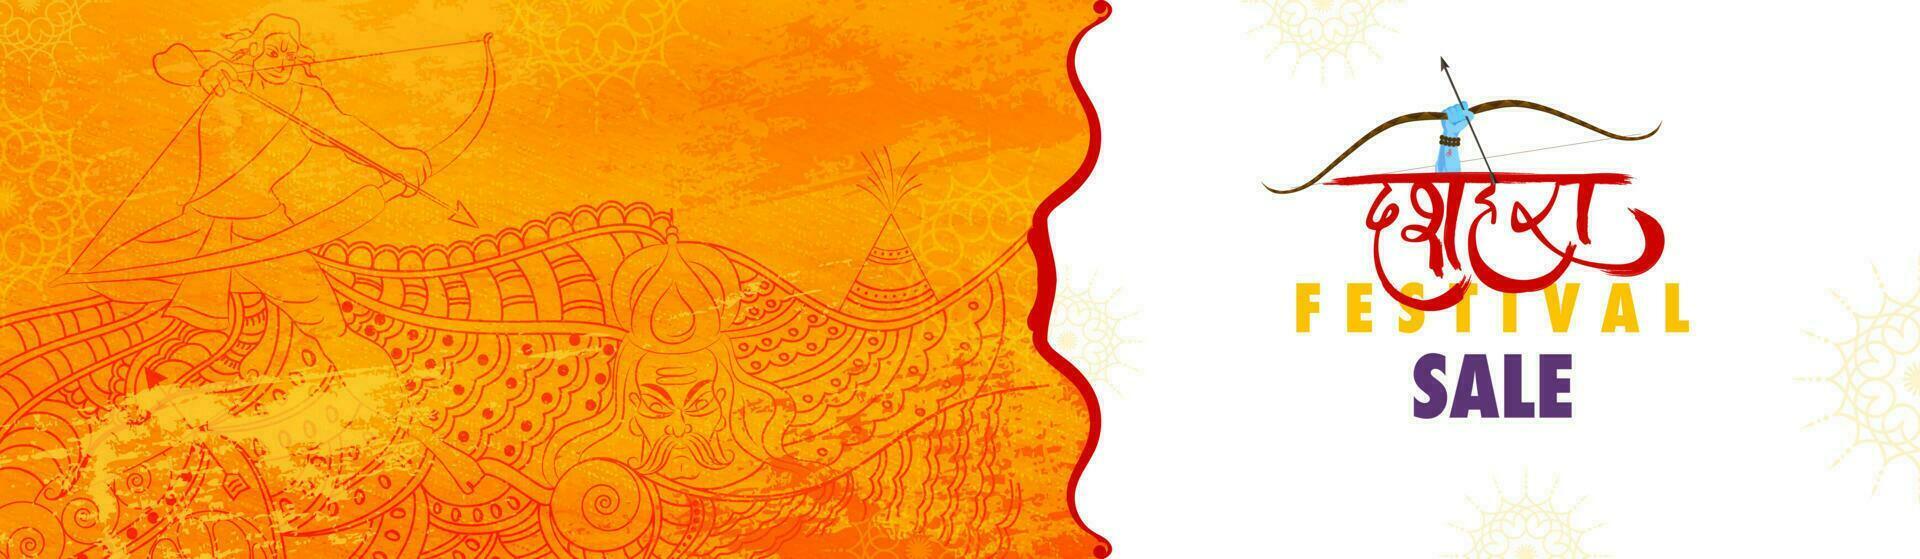 Dussehra Festival Sale Banner Or Header Design With Lord Rama Killing The Demon Ravana On Orange And White Background. vector